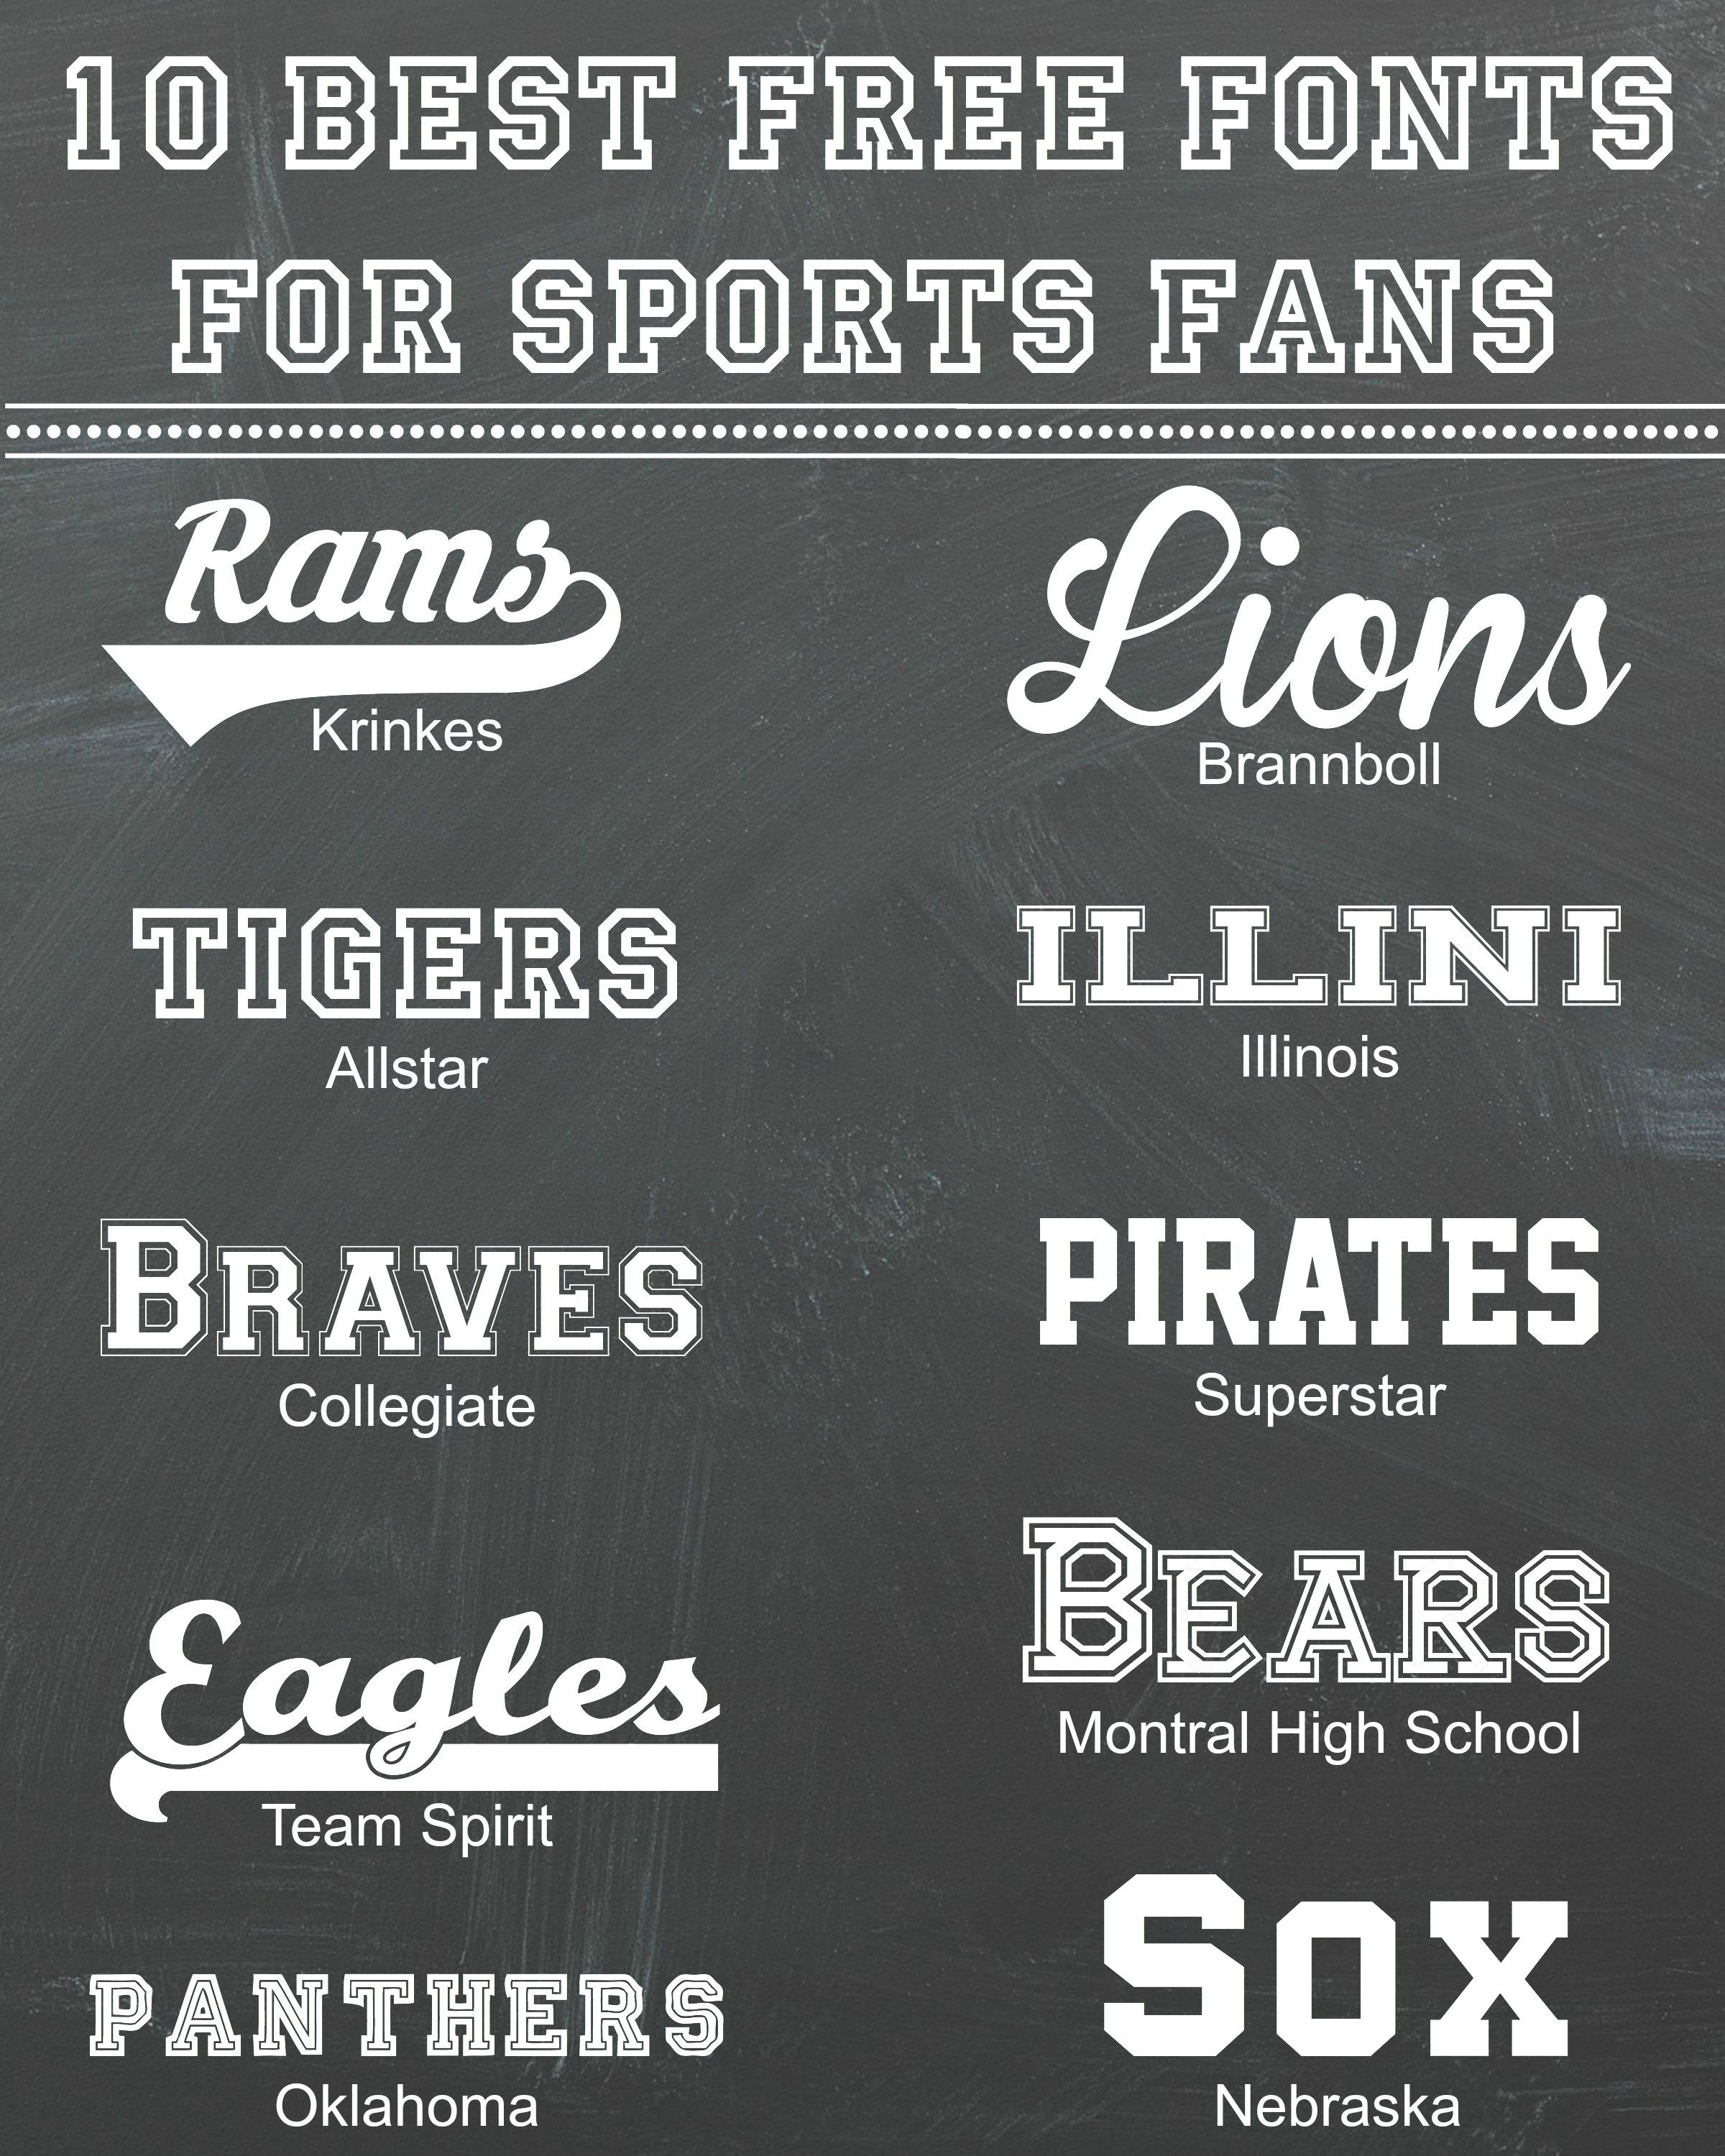 10-best-free-fonts-for-sports-fans-rosewood-and-grace